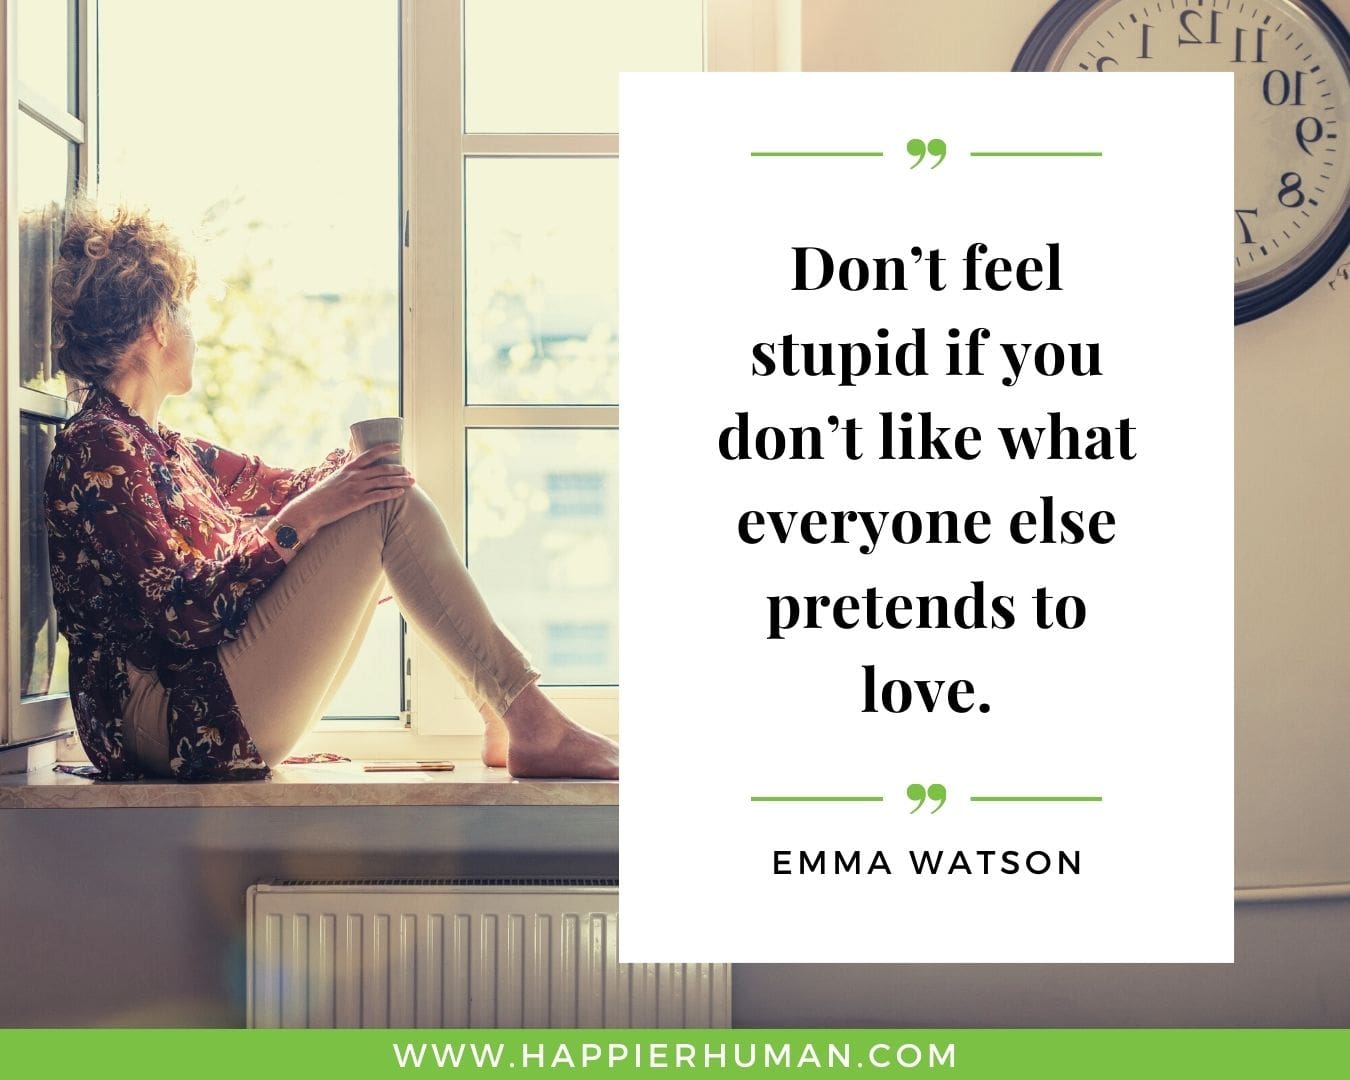 Introvert Quotes - “Don’t feel stupid if you don’t like what everyone else pretends to love.” – Emma Watson